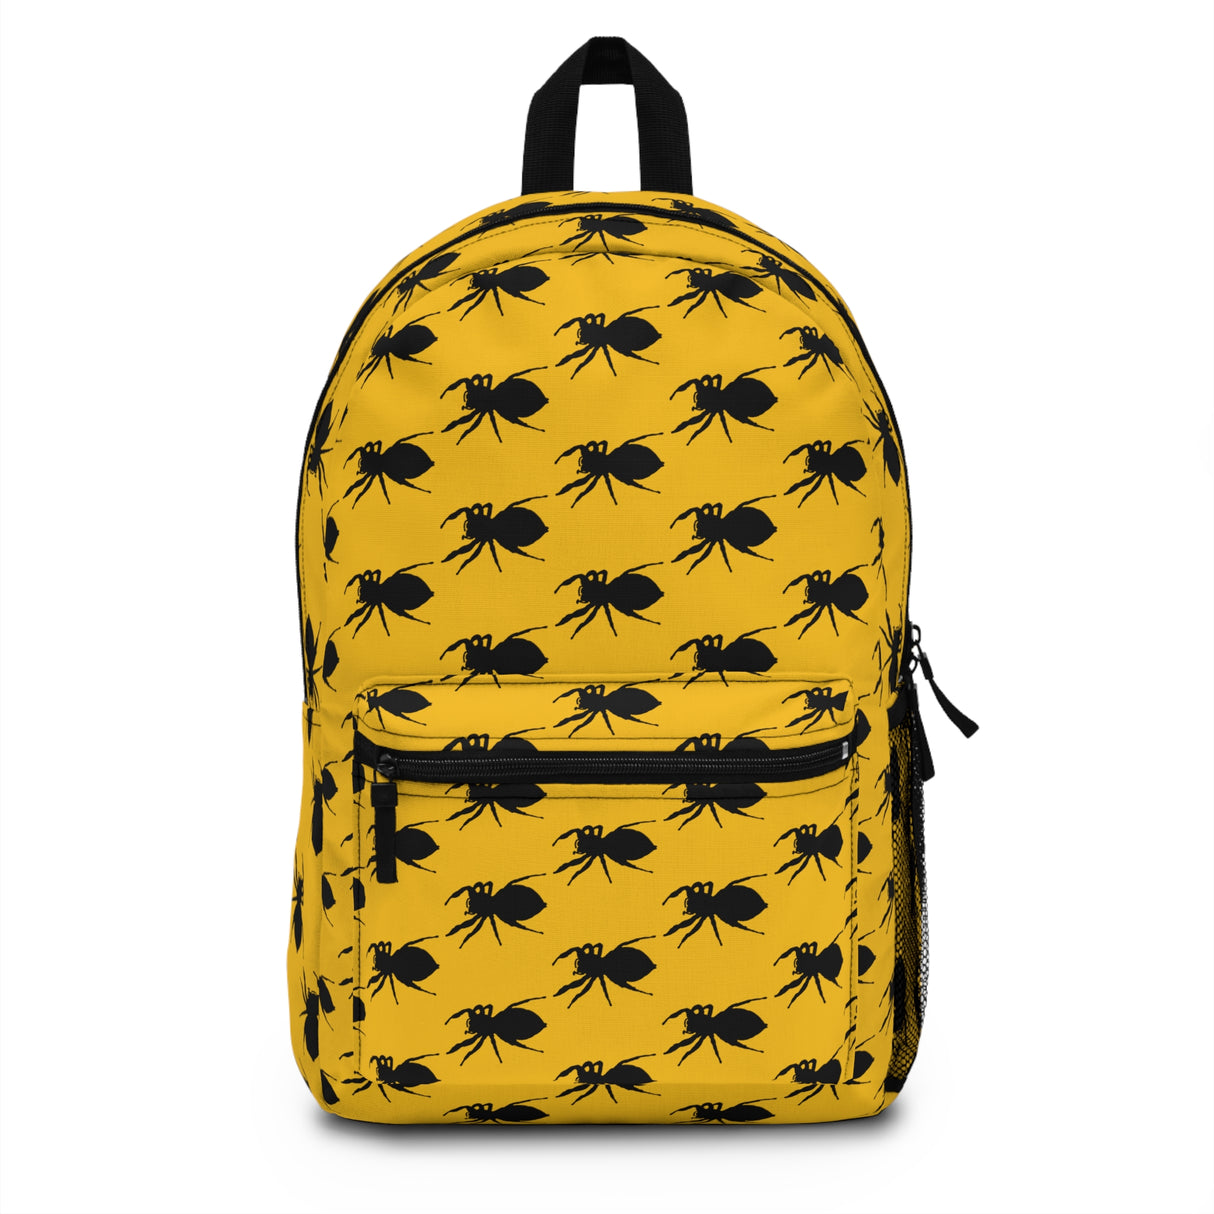 Jumping Spider Print Backpack on Yellow Made in USA